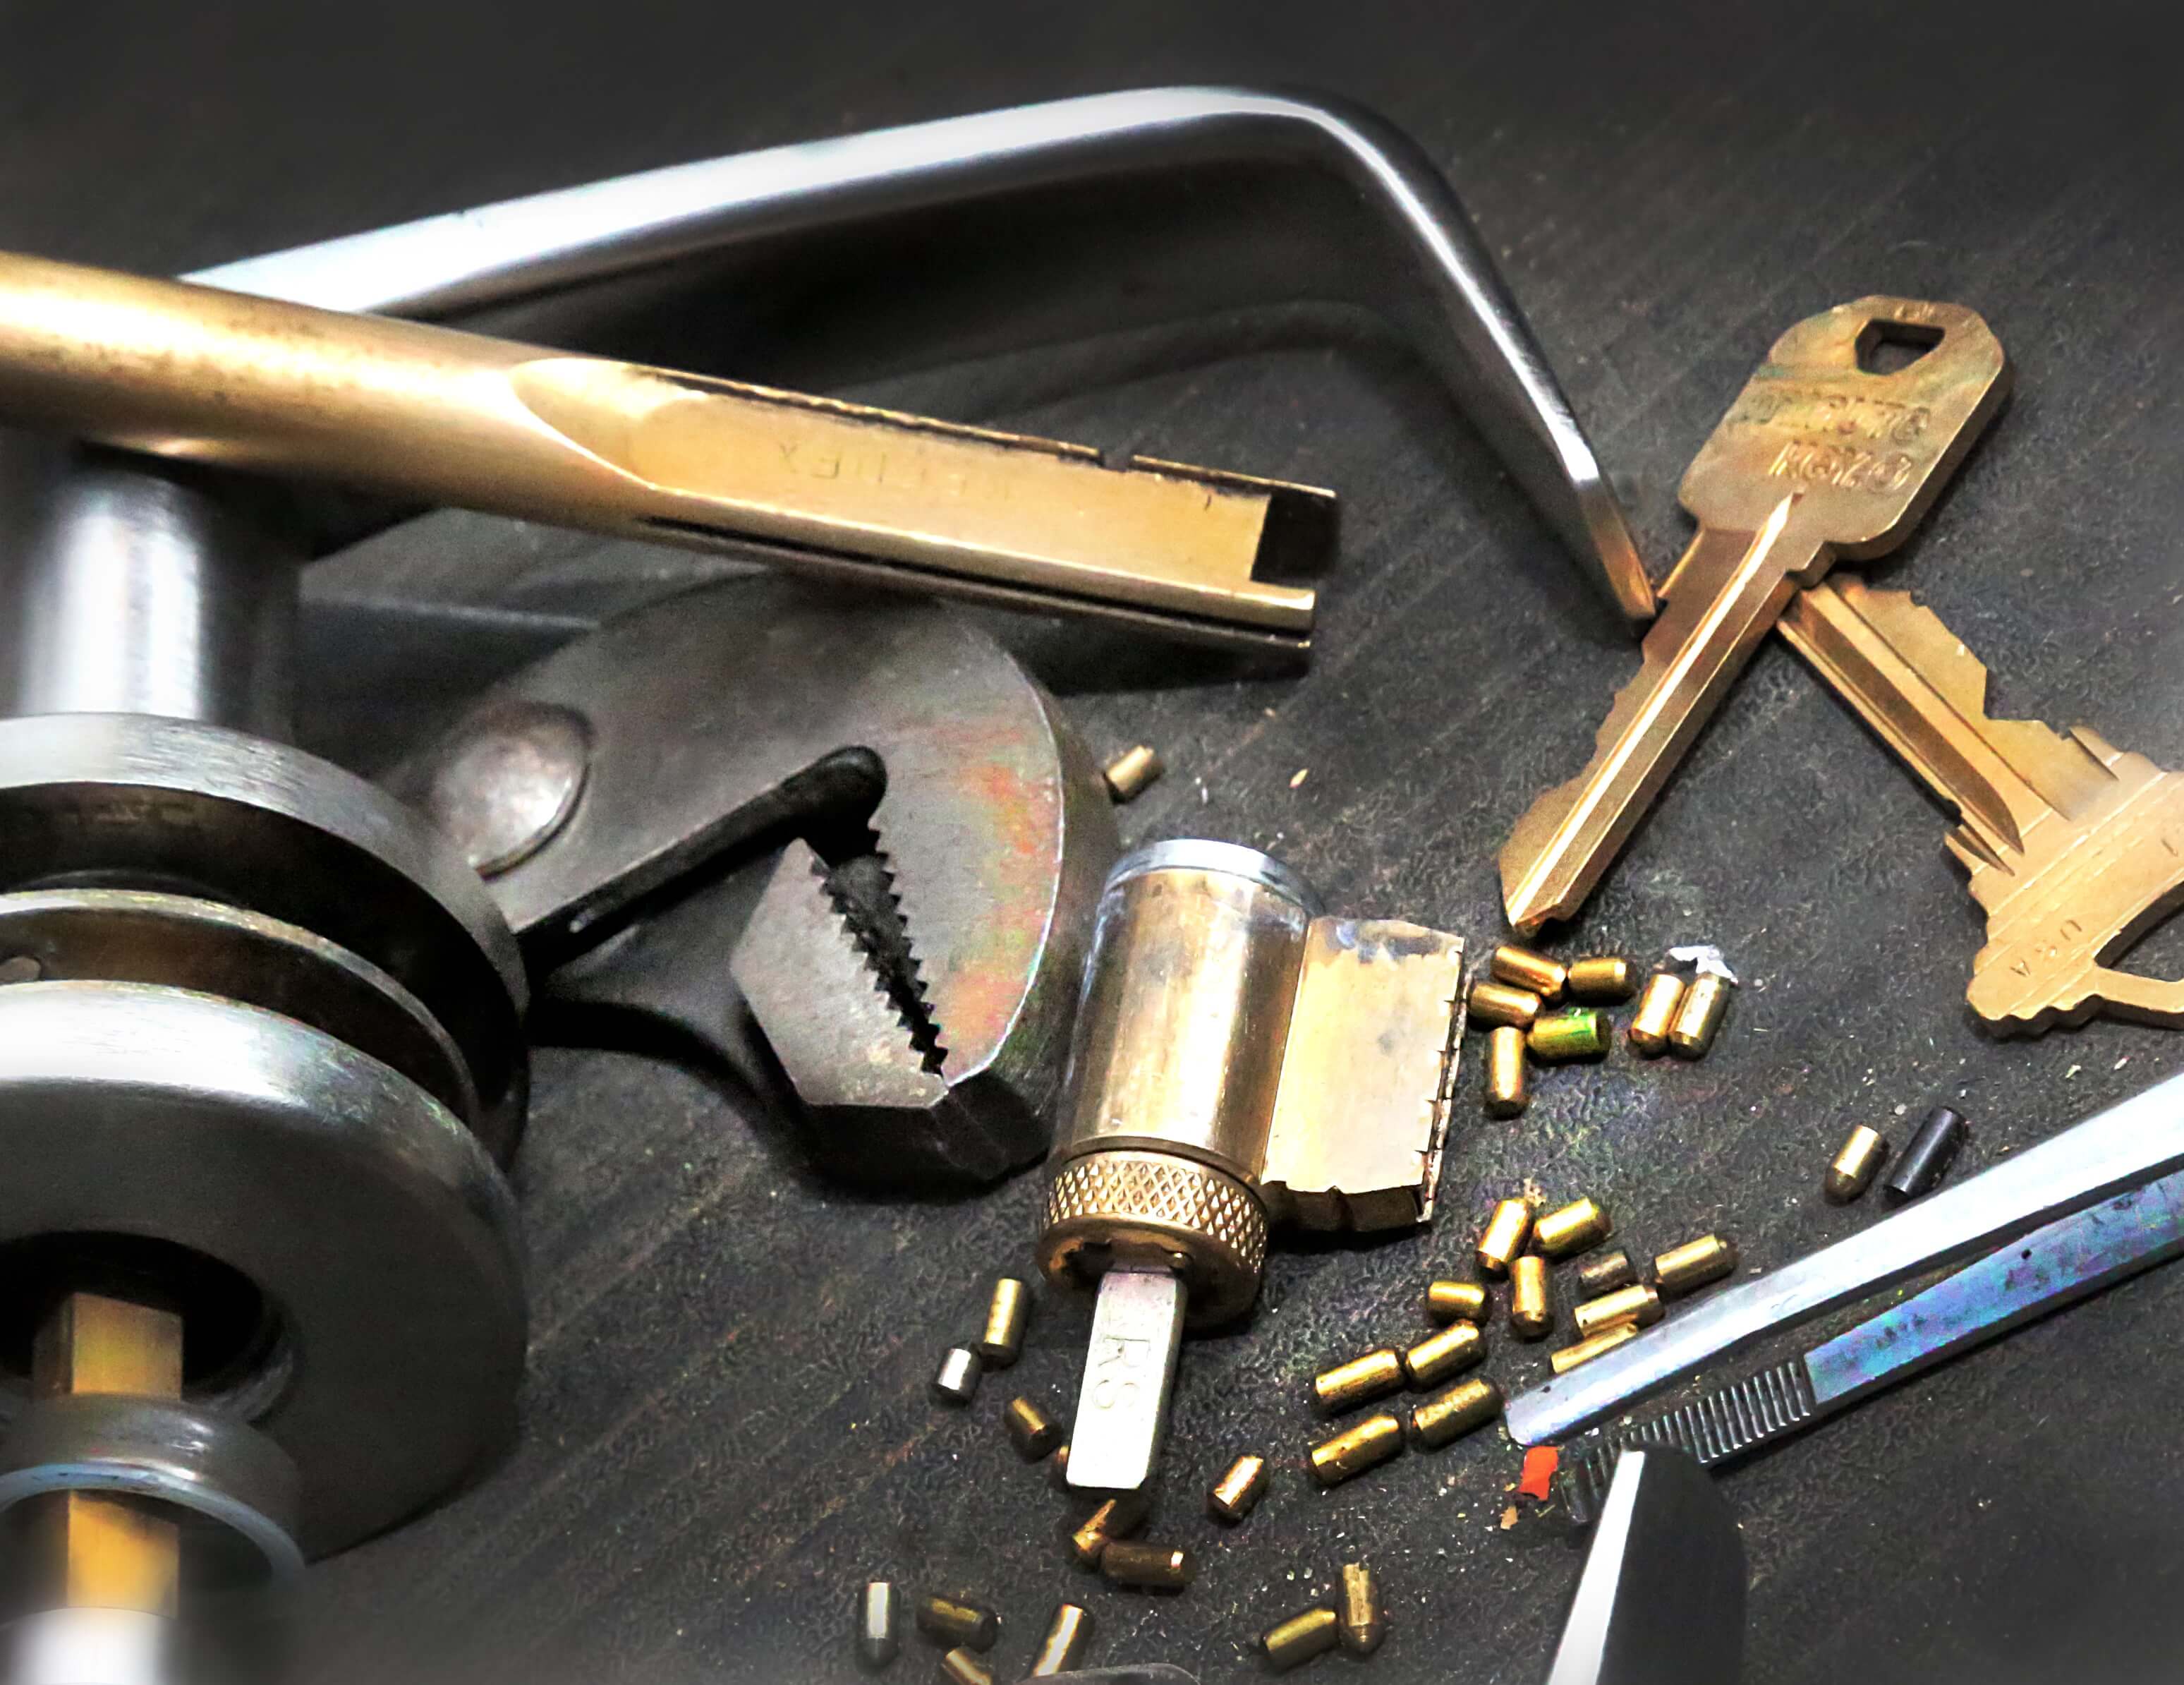 24 hour Emergency Locksmith In Beccles